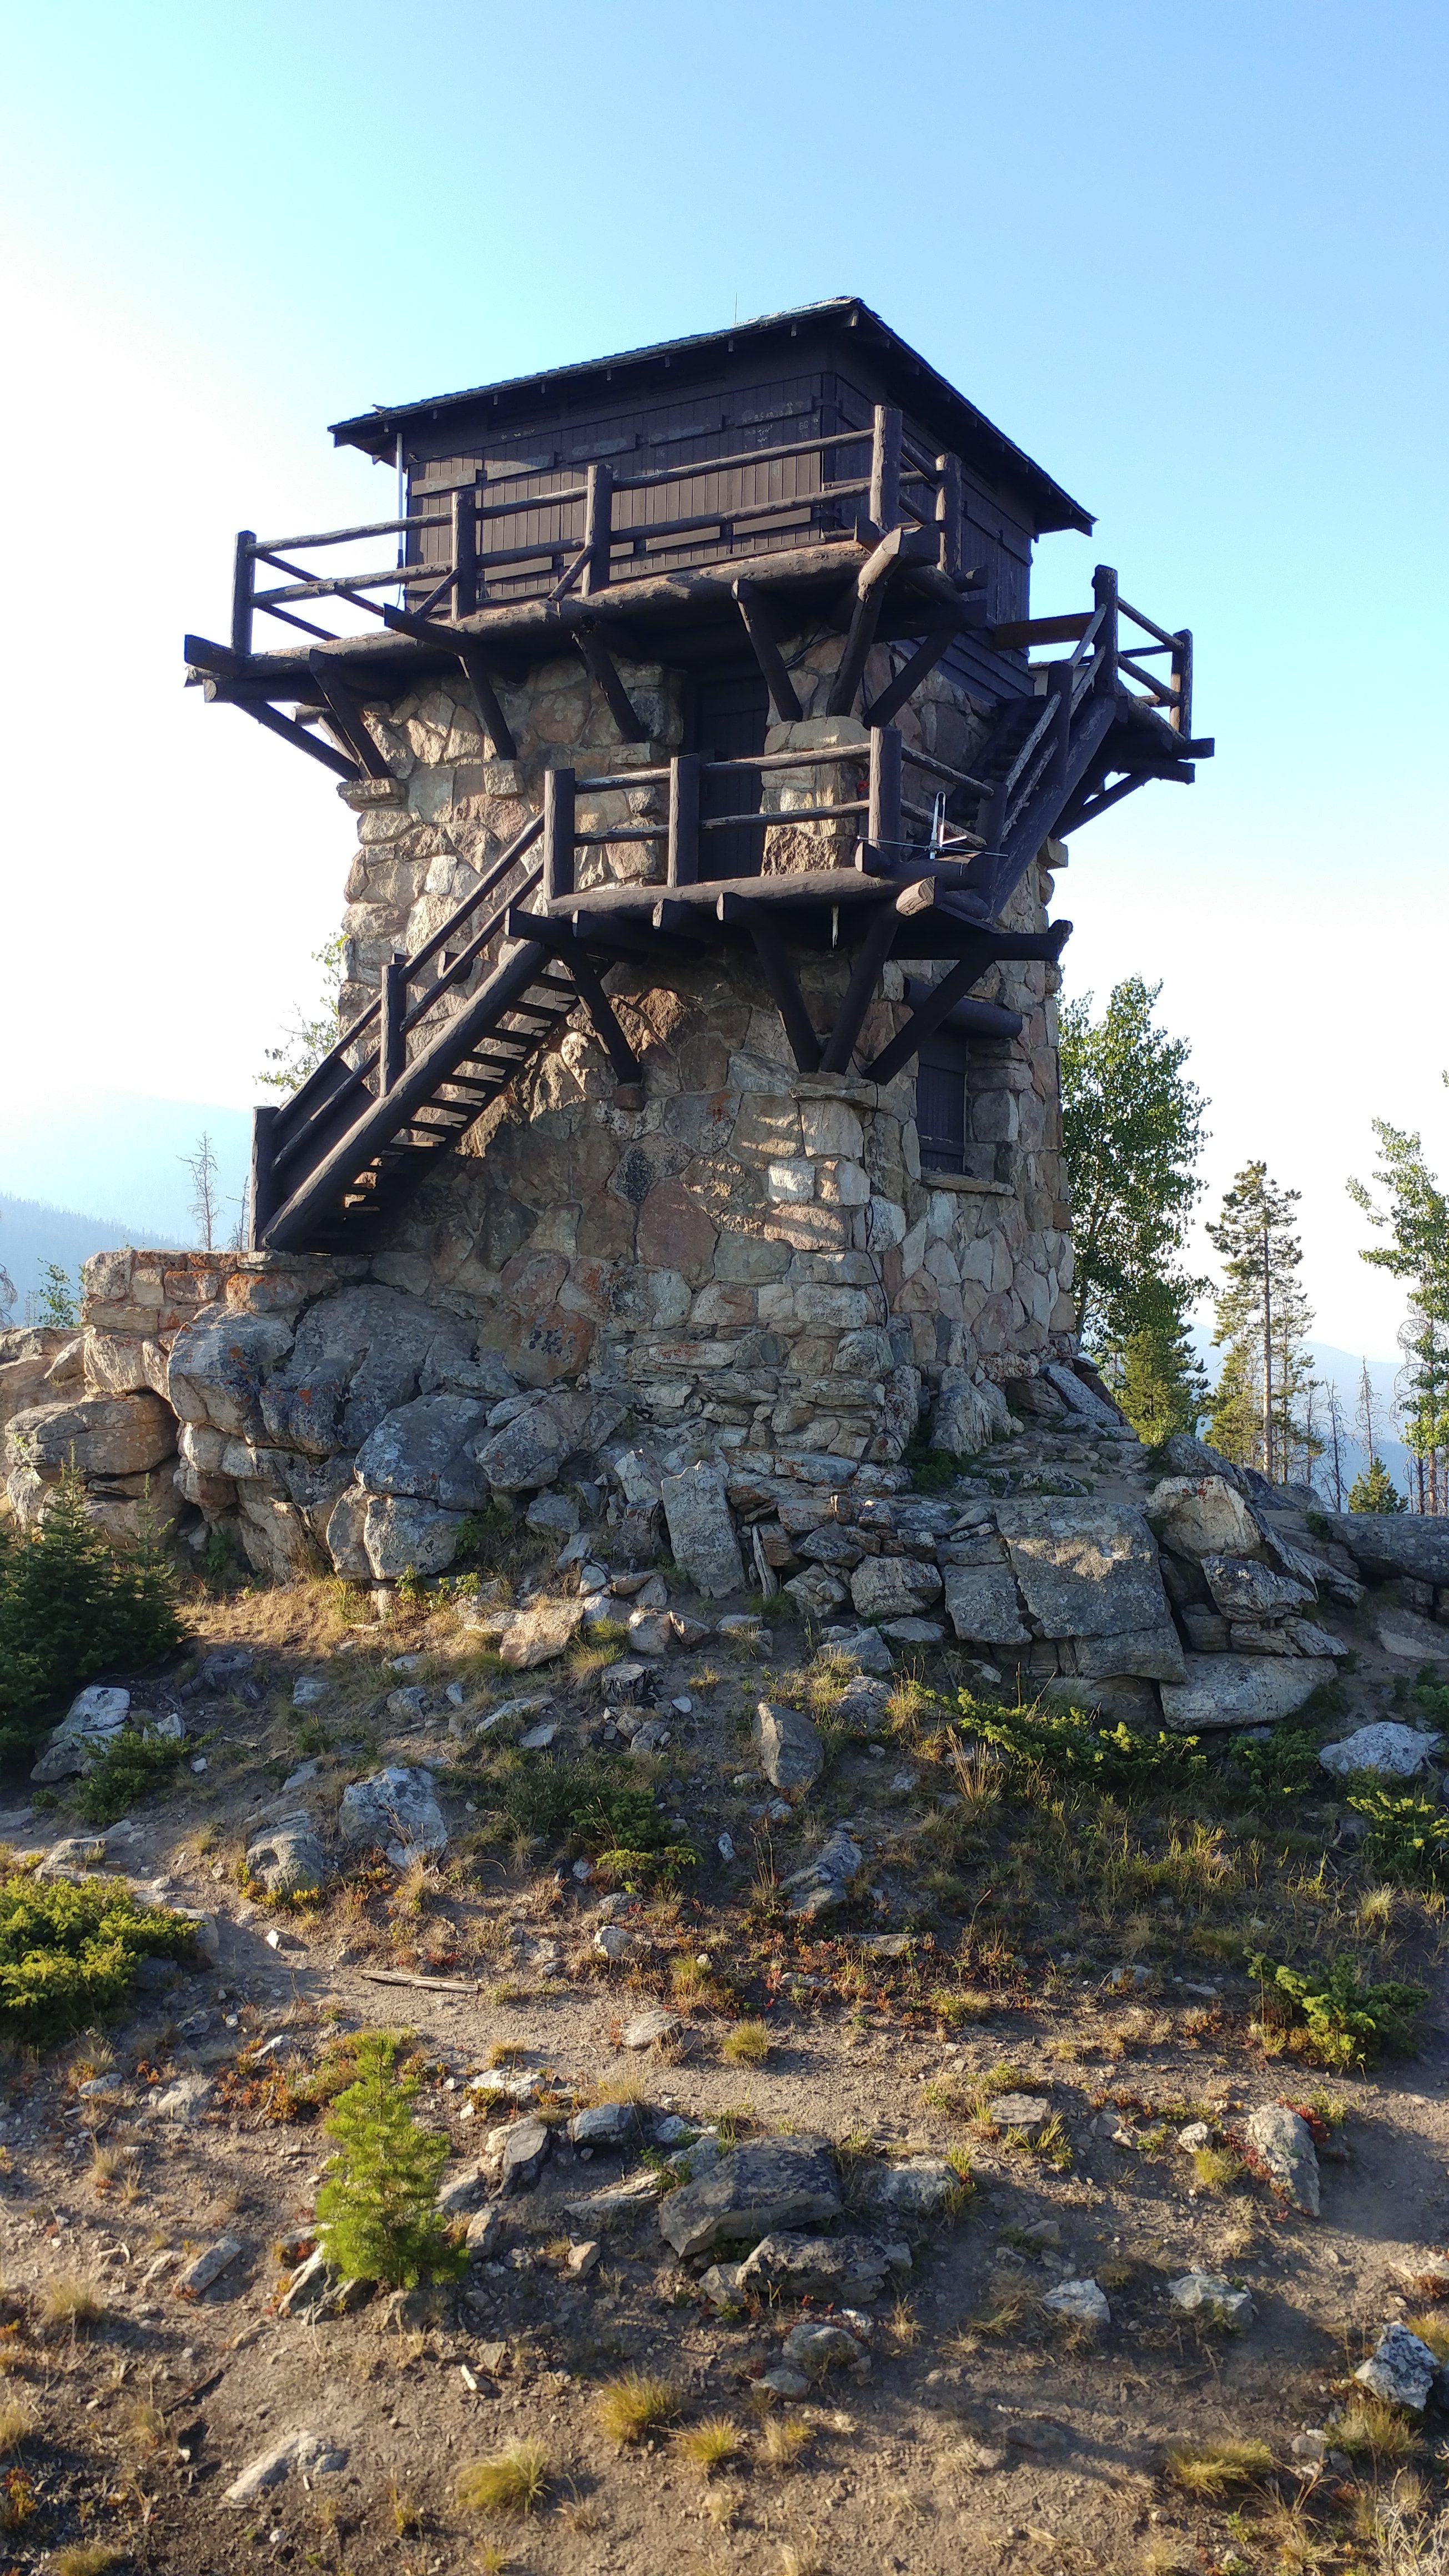 Photo of the stone and wood structure that is the Shadow Mountain Fire Lookout tower. It is a tall structure, square in shape, with a wooden deck and room that sits atop a stone base.